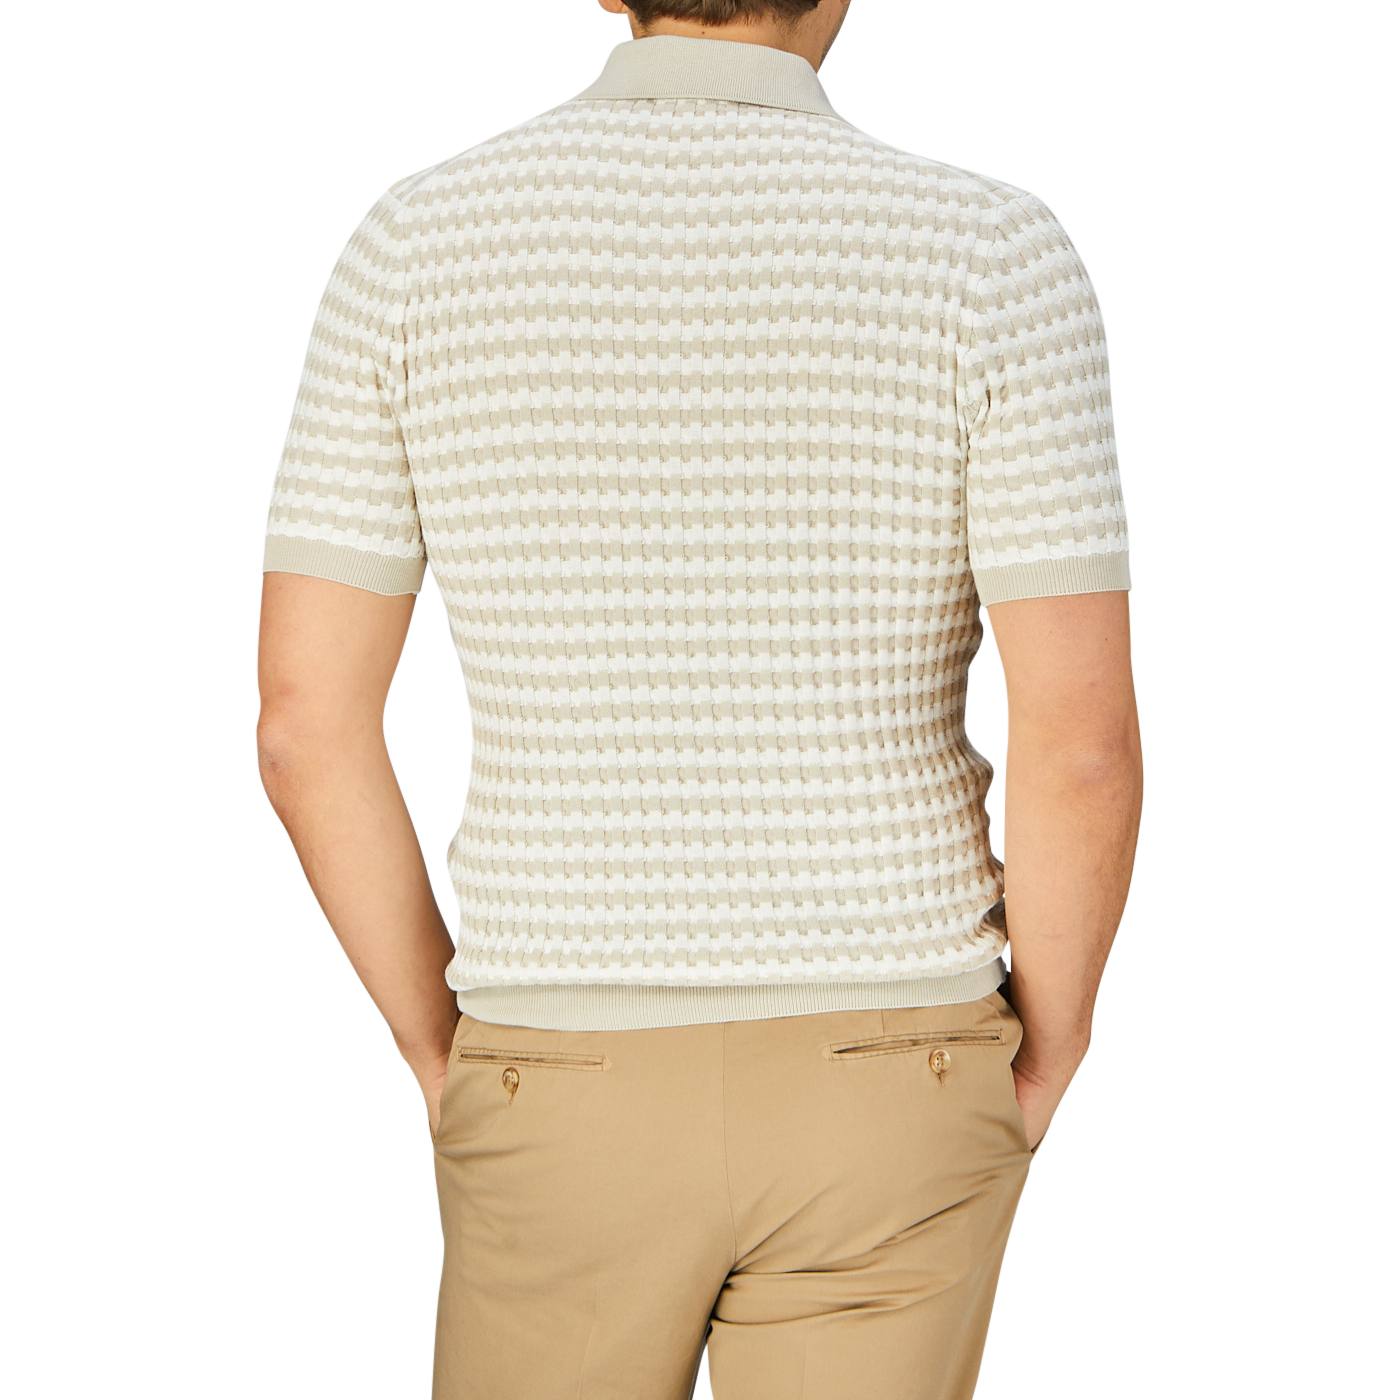 A person photographed from behind wearing a Mauro Ottaviani Cream Beige Cotton Rib-Knitted Polo Shirt and tan trousers.